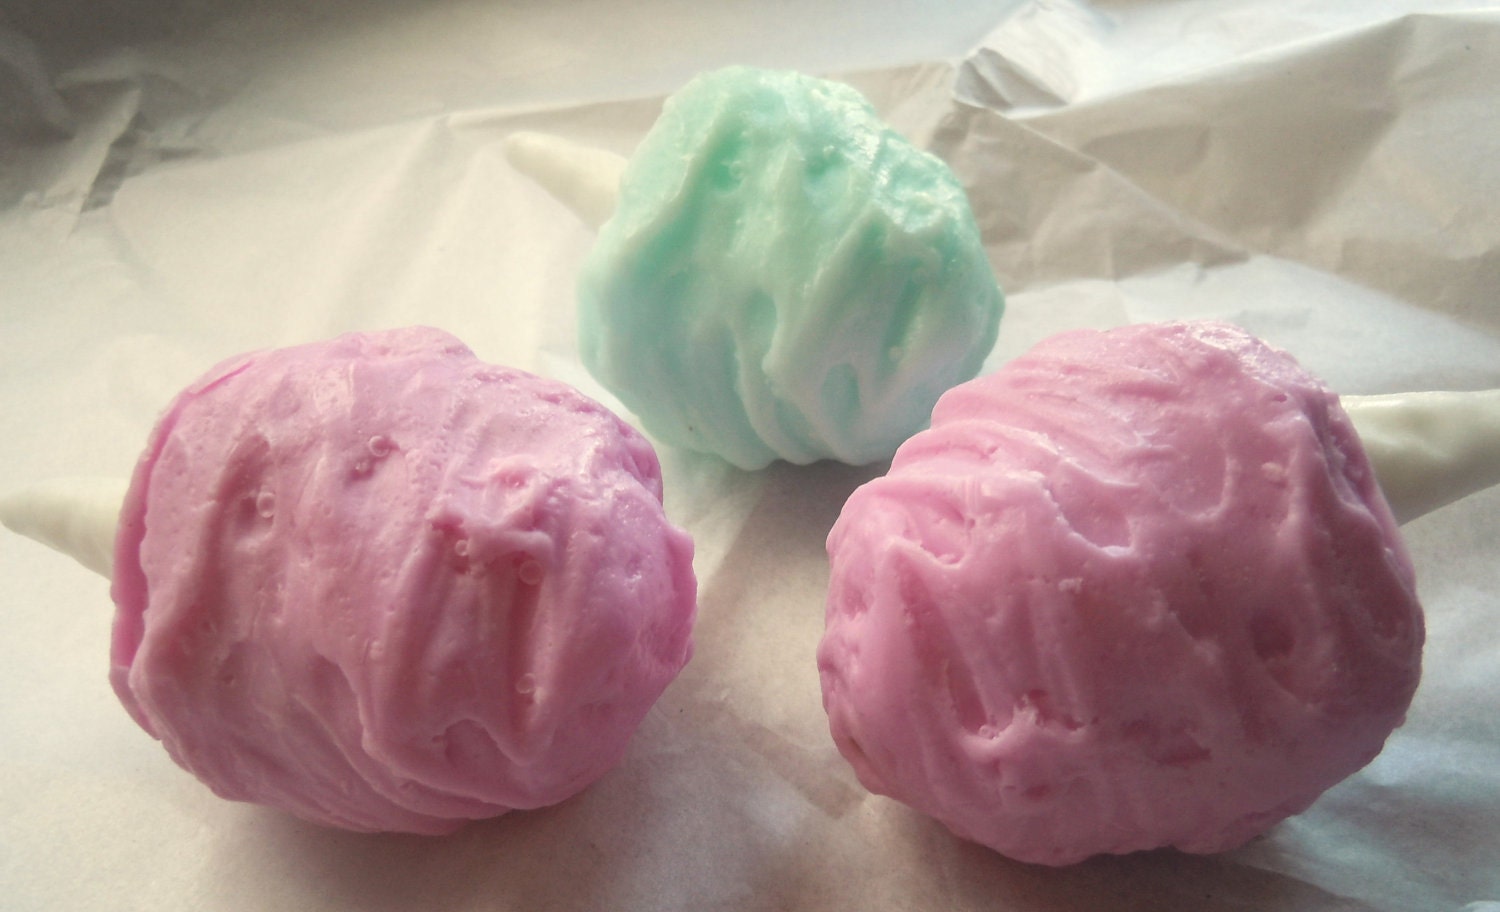 Candy Soap